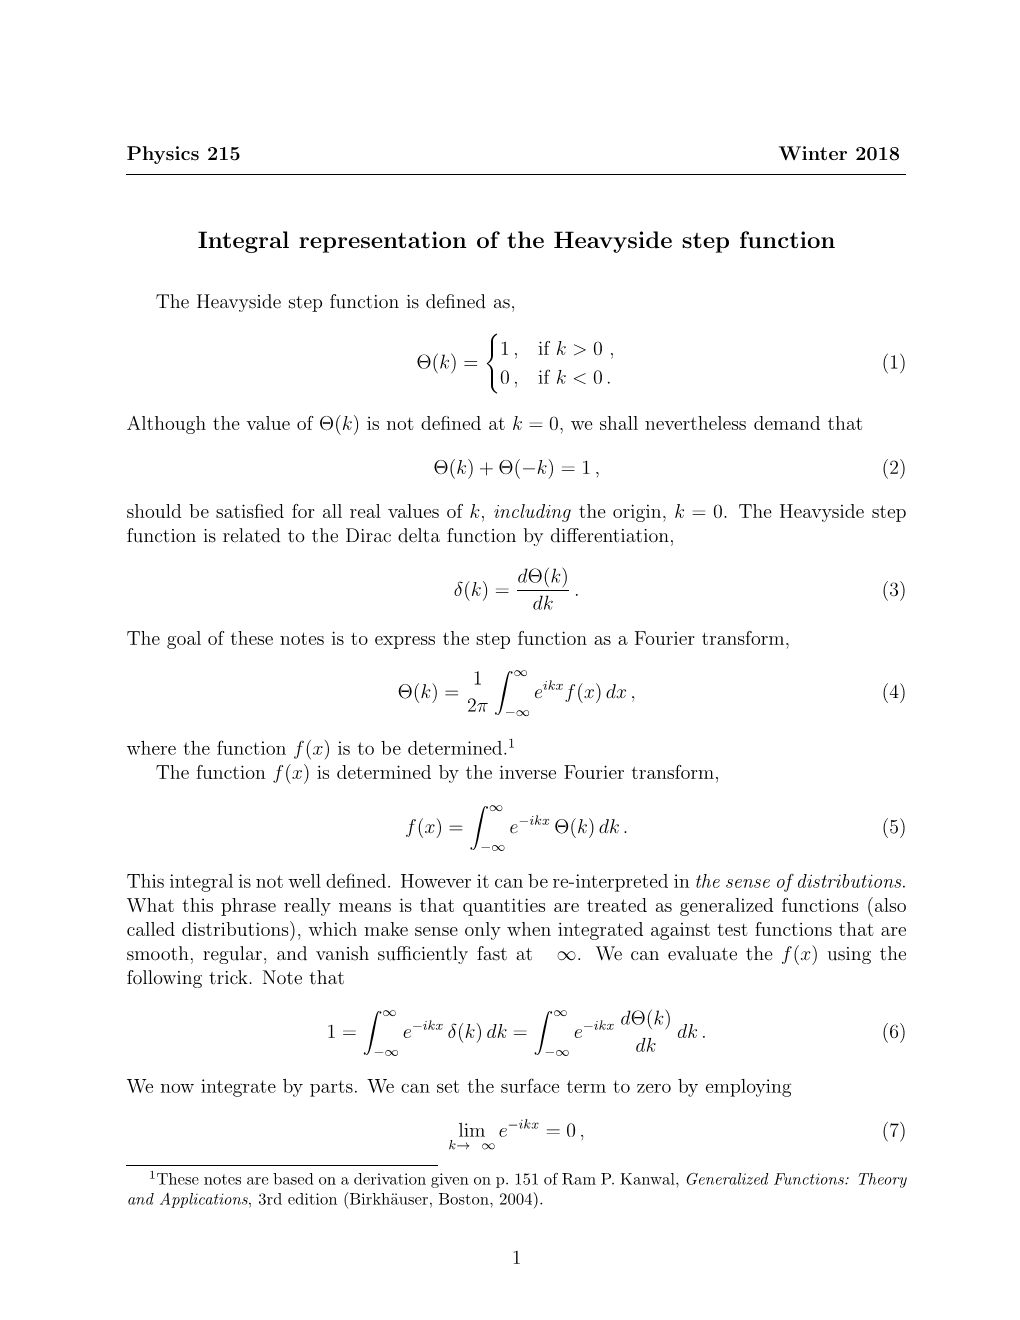 Integral Representation of the Heavyside Step Function